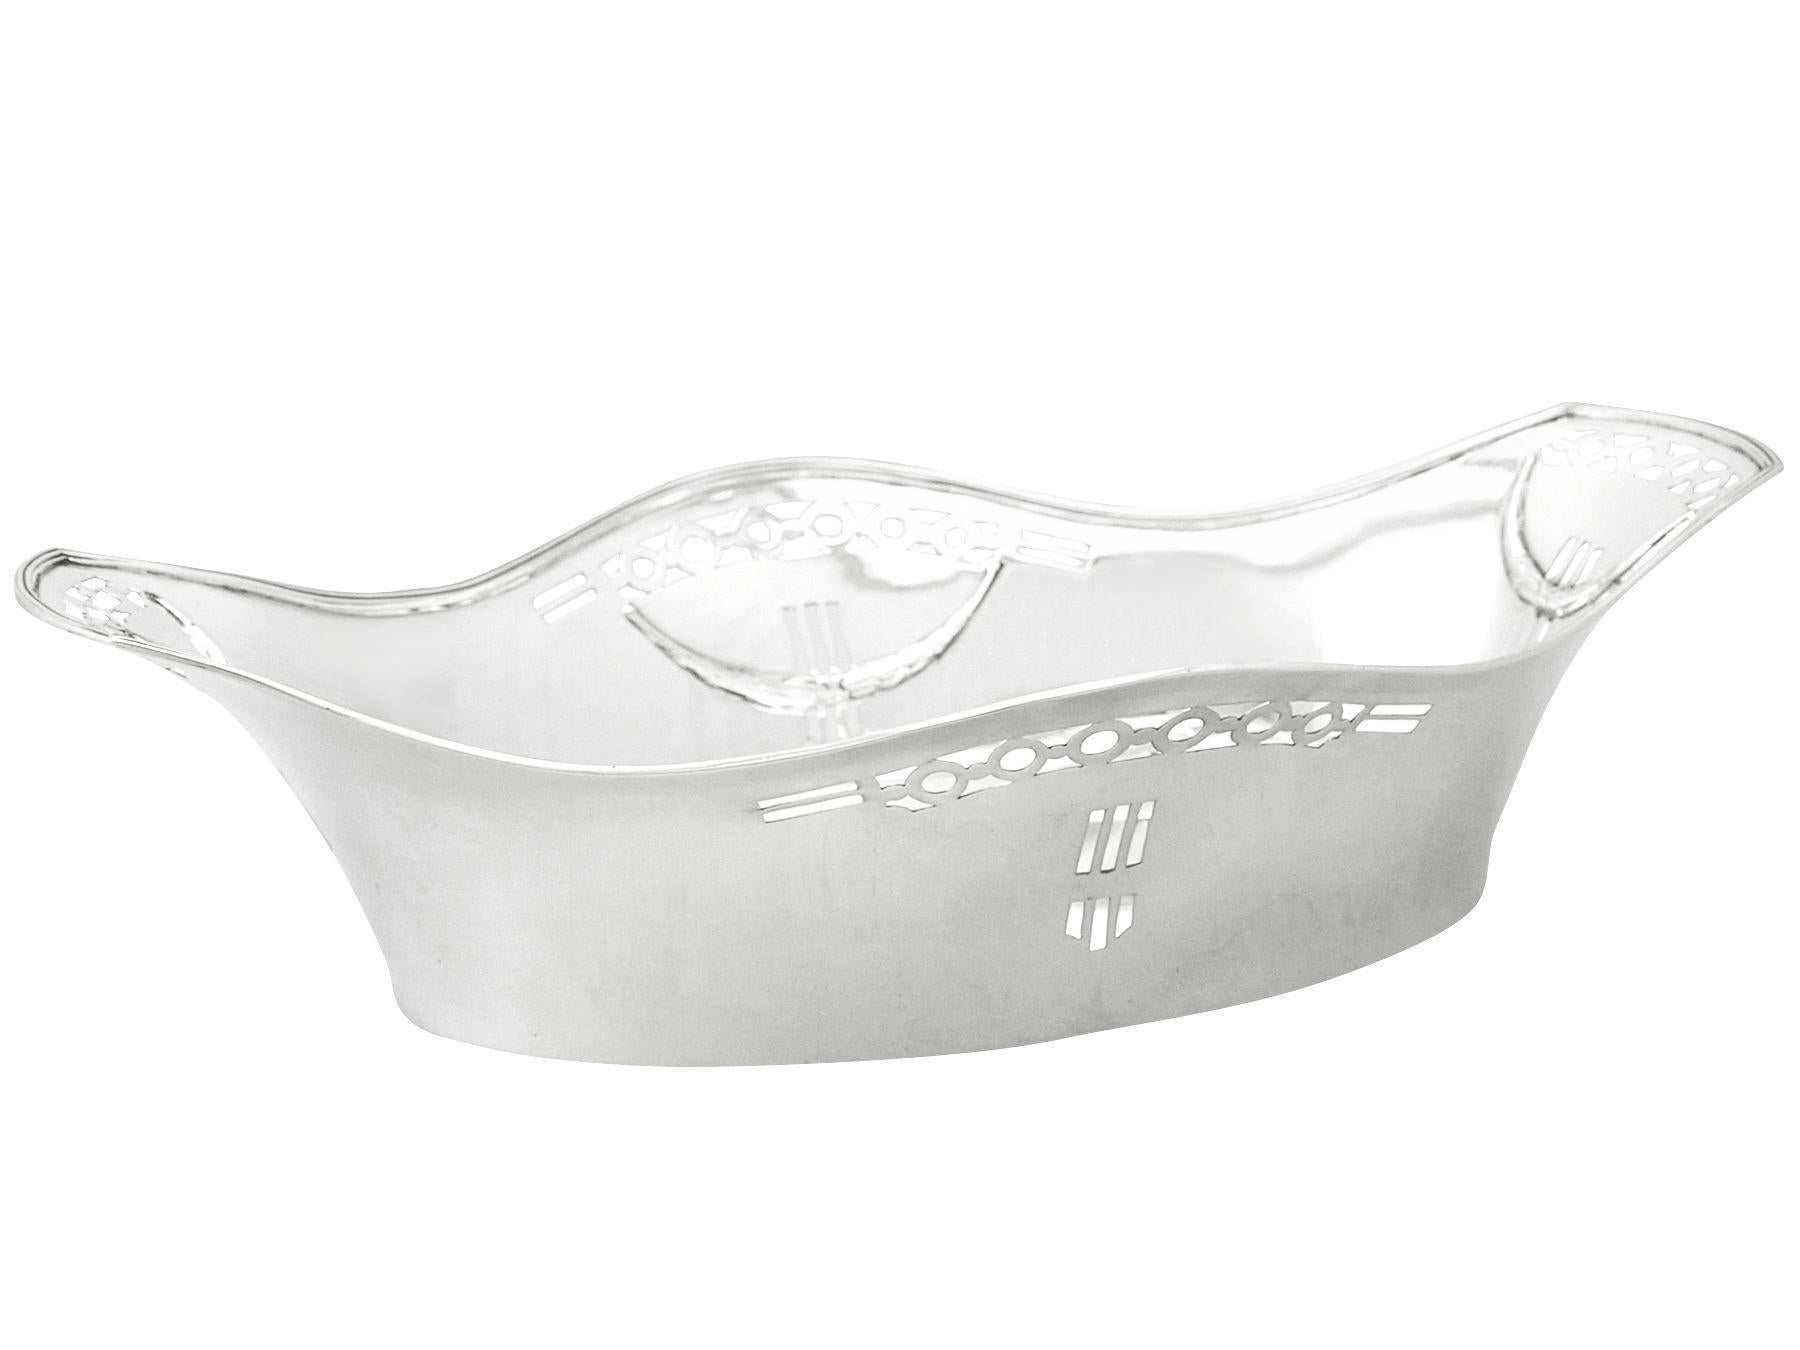 A fine and impressive antique German silver bread dish in the Art Deco style; an addition to our range of continental dining silverware.

This fine antique German silver bread dish has an oval boat shaped form.

The interior surface of the dish is